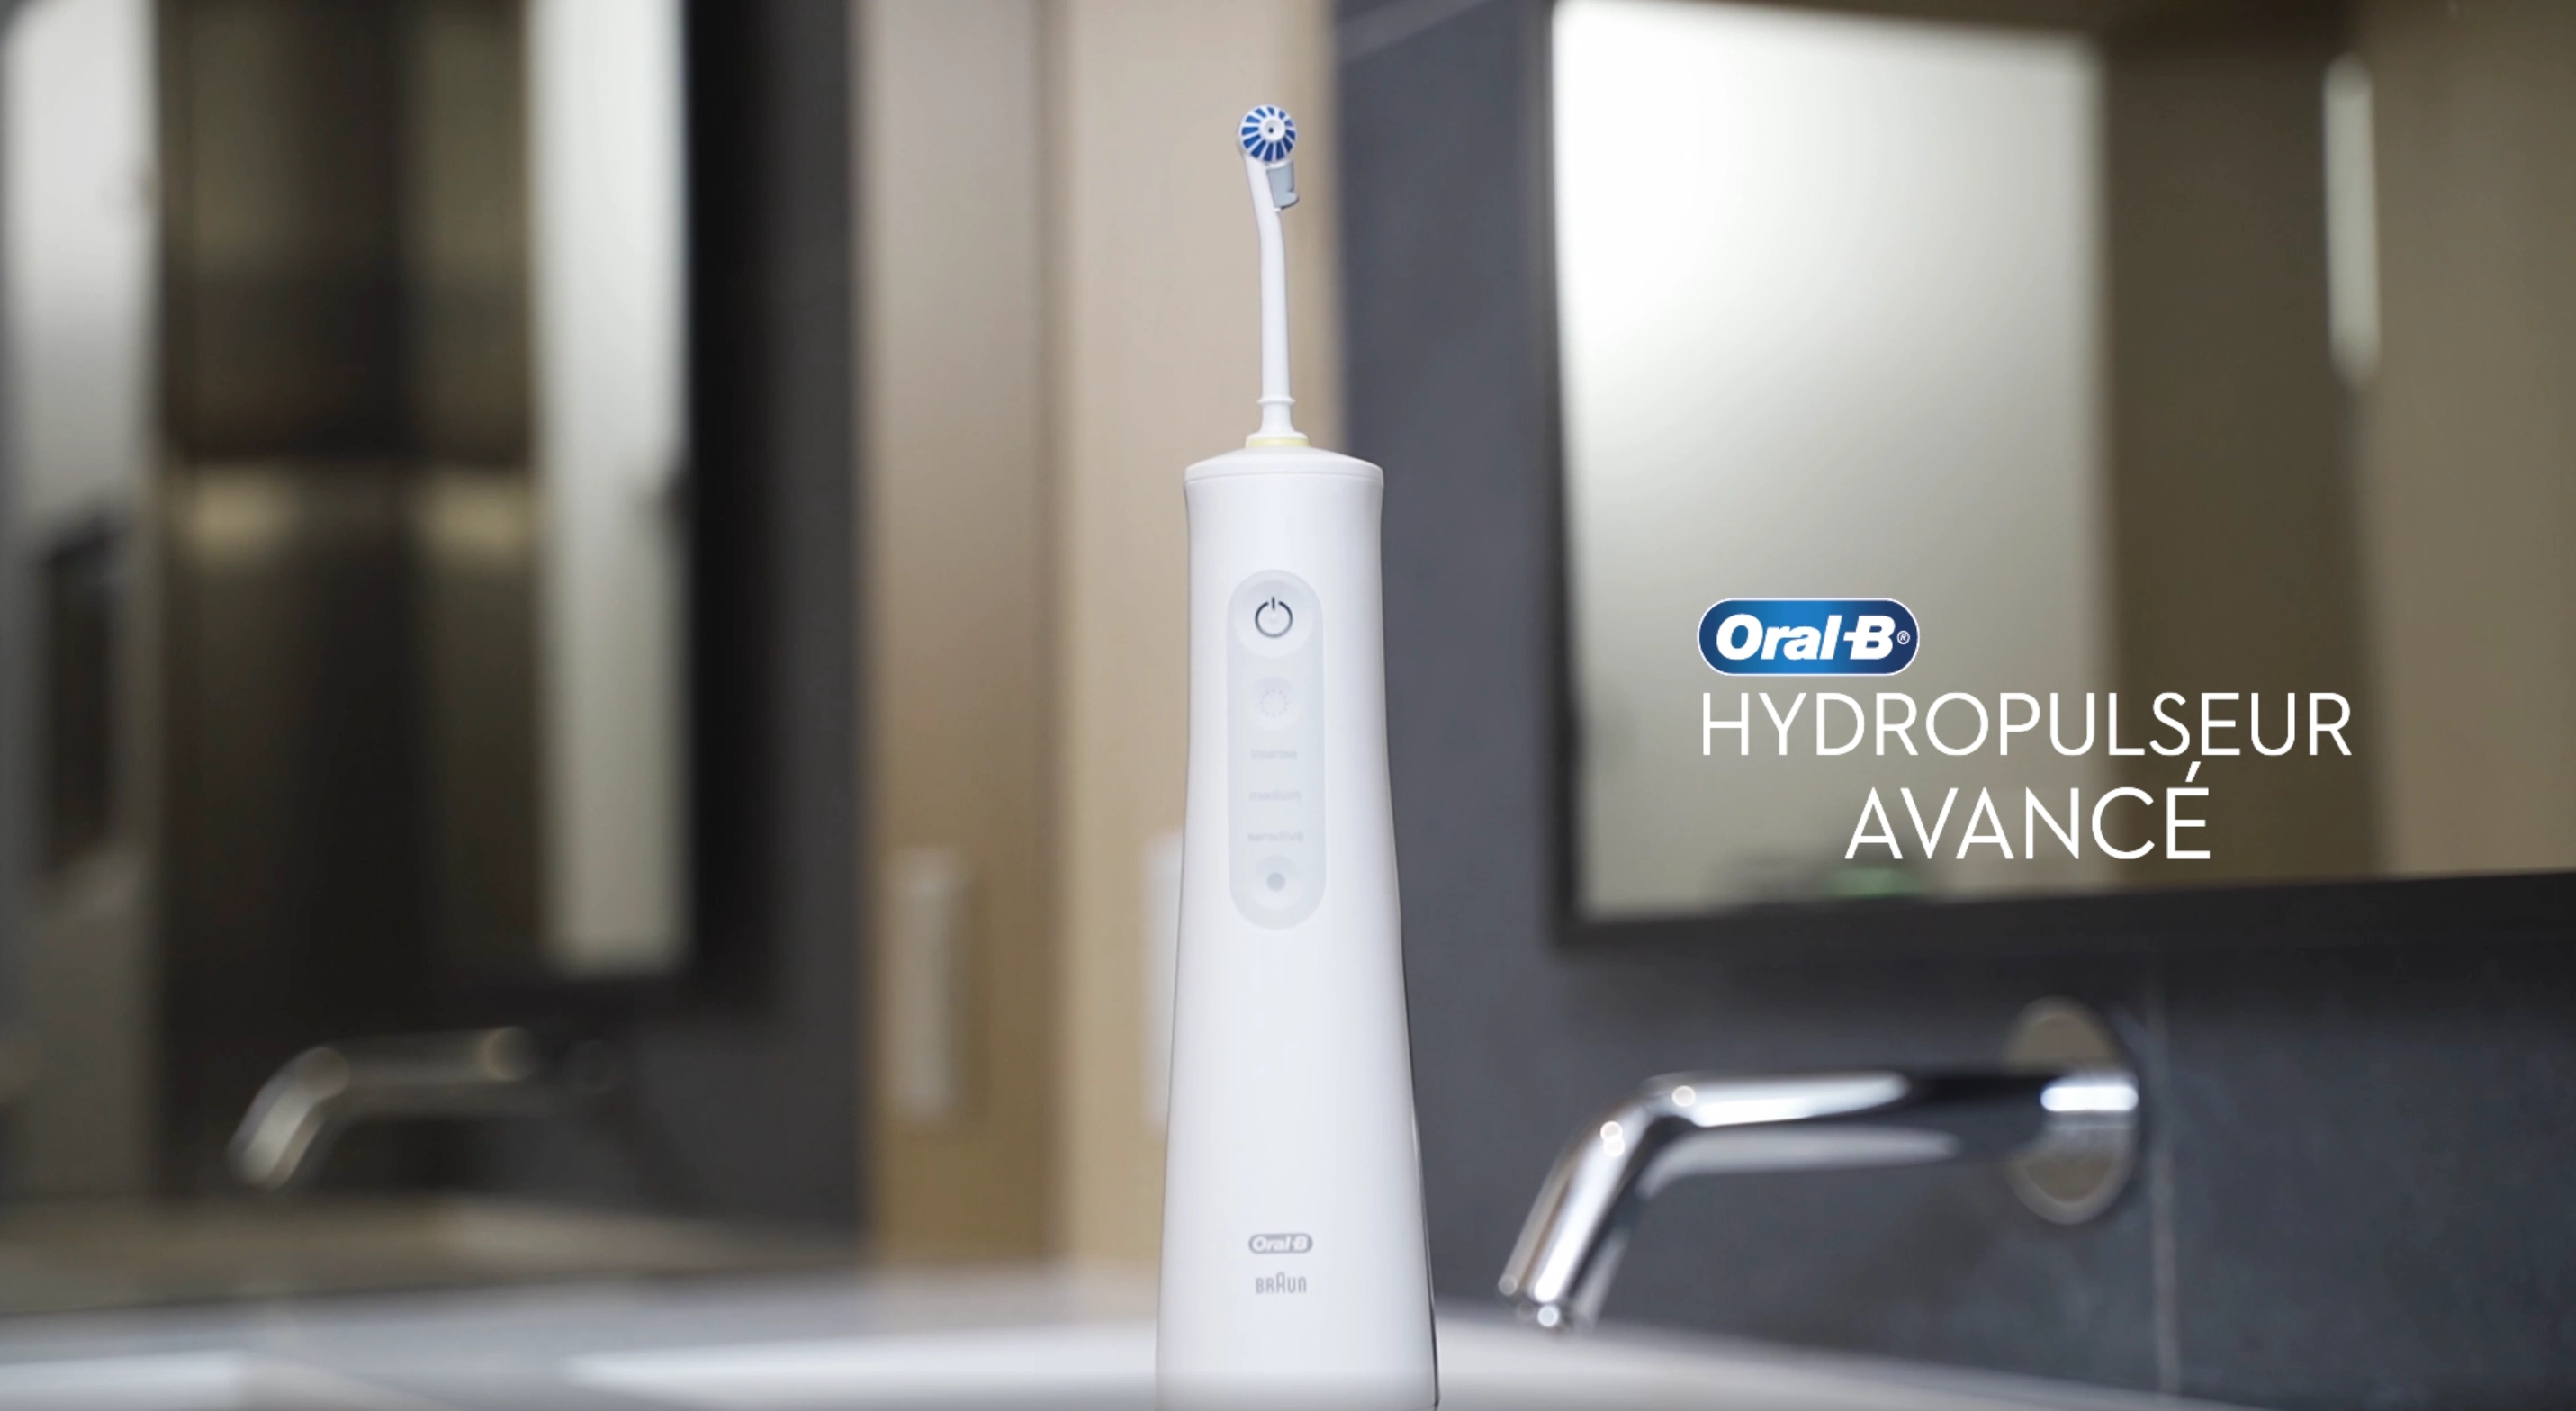 CCH - Videos -  Water Flosser Advance Instruction For Patients